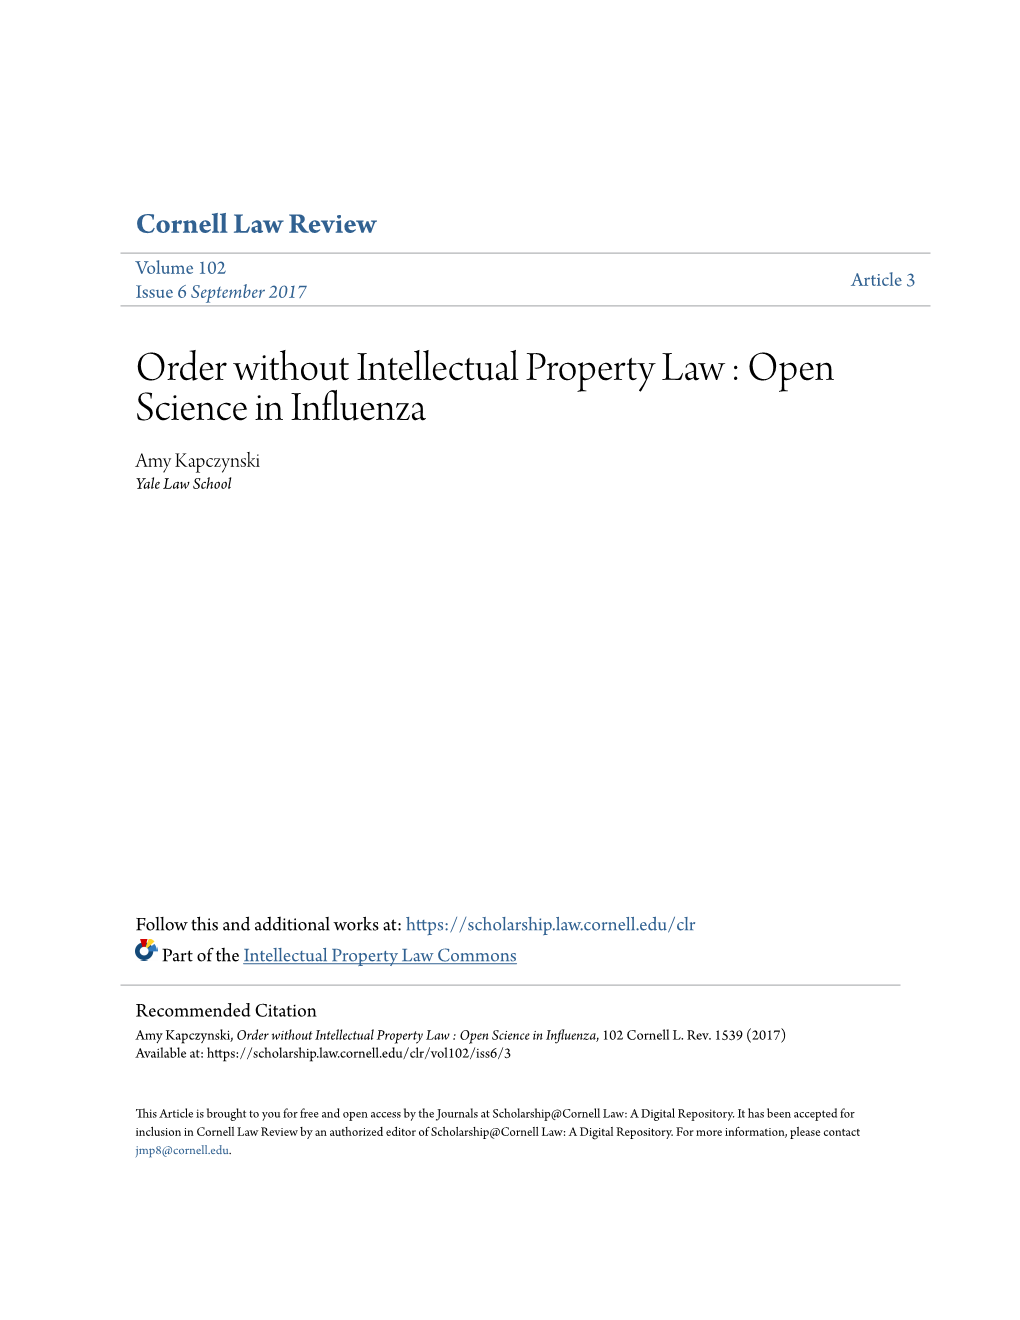 Order Without Intellectual Property Law : Open Science in Influenza Amy Kapczynski Yale Law School